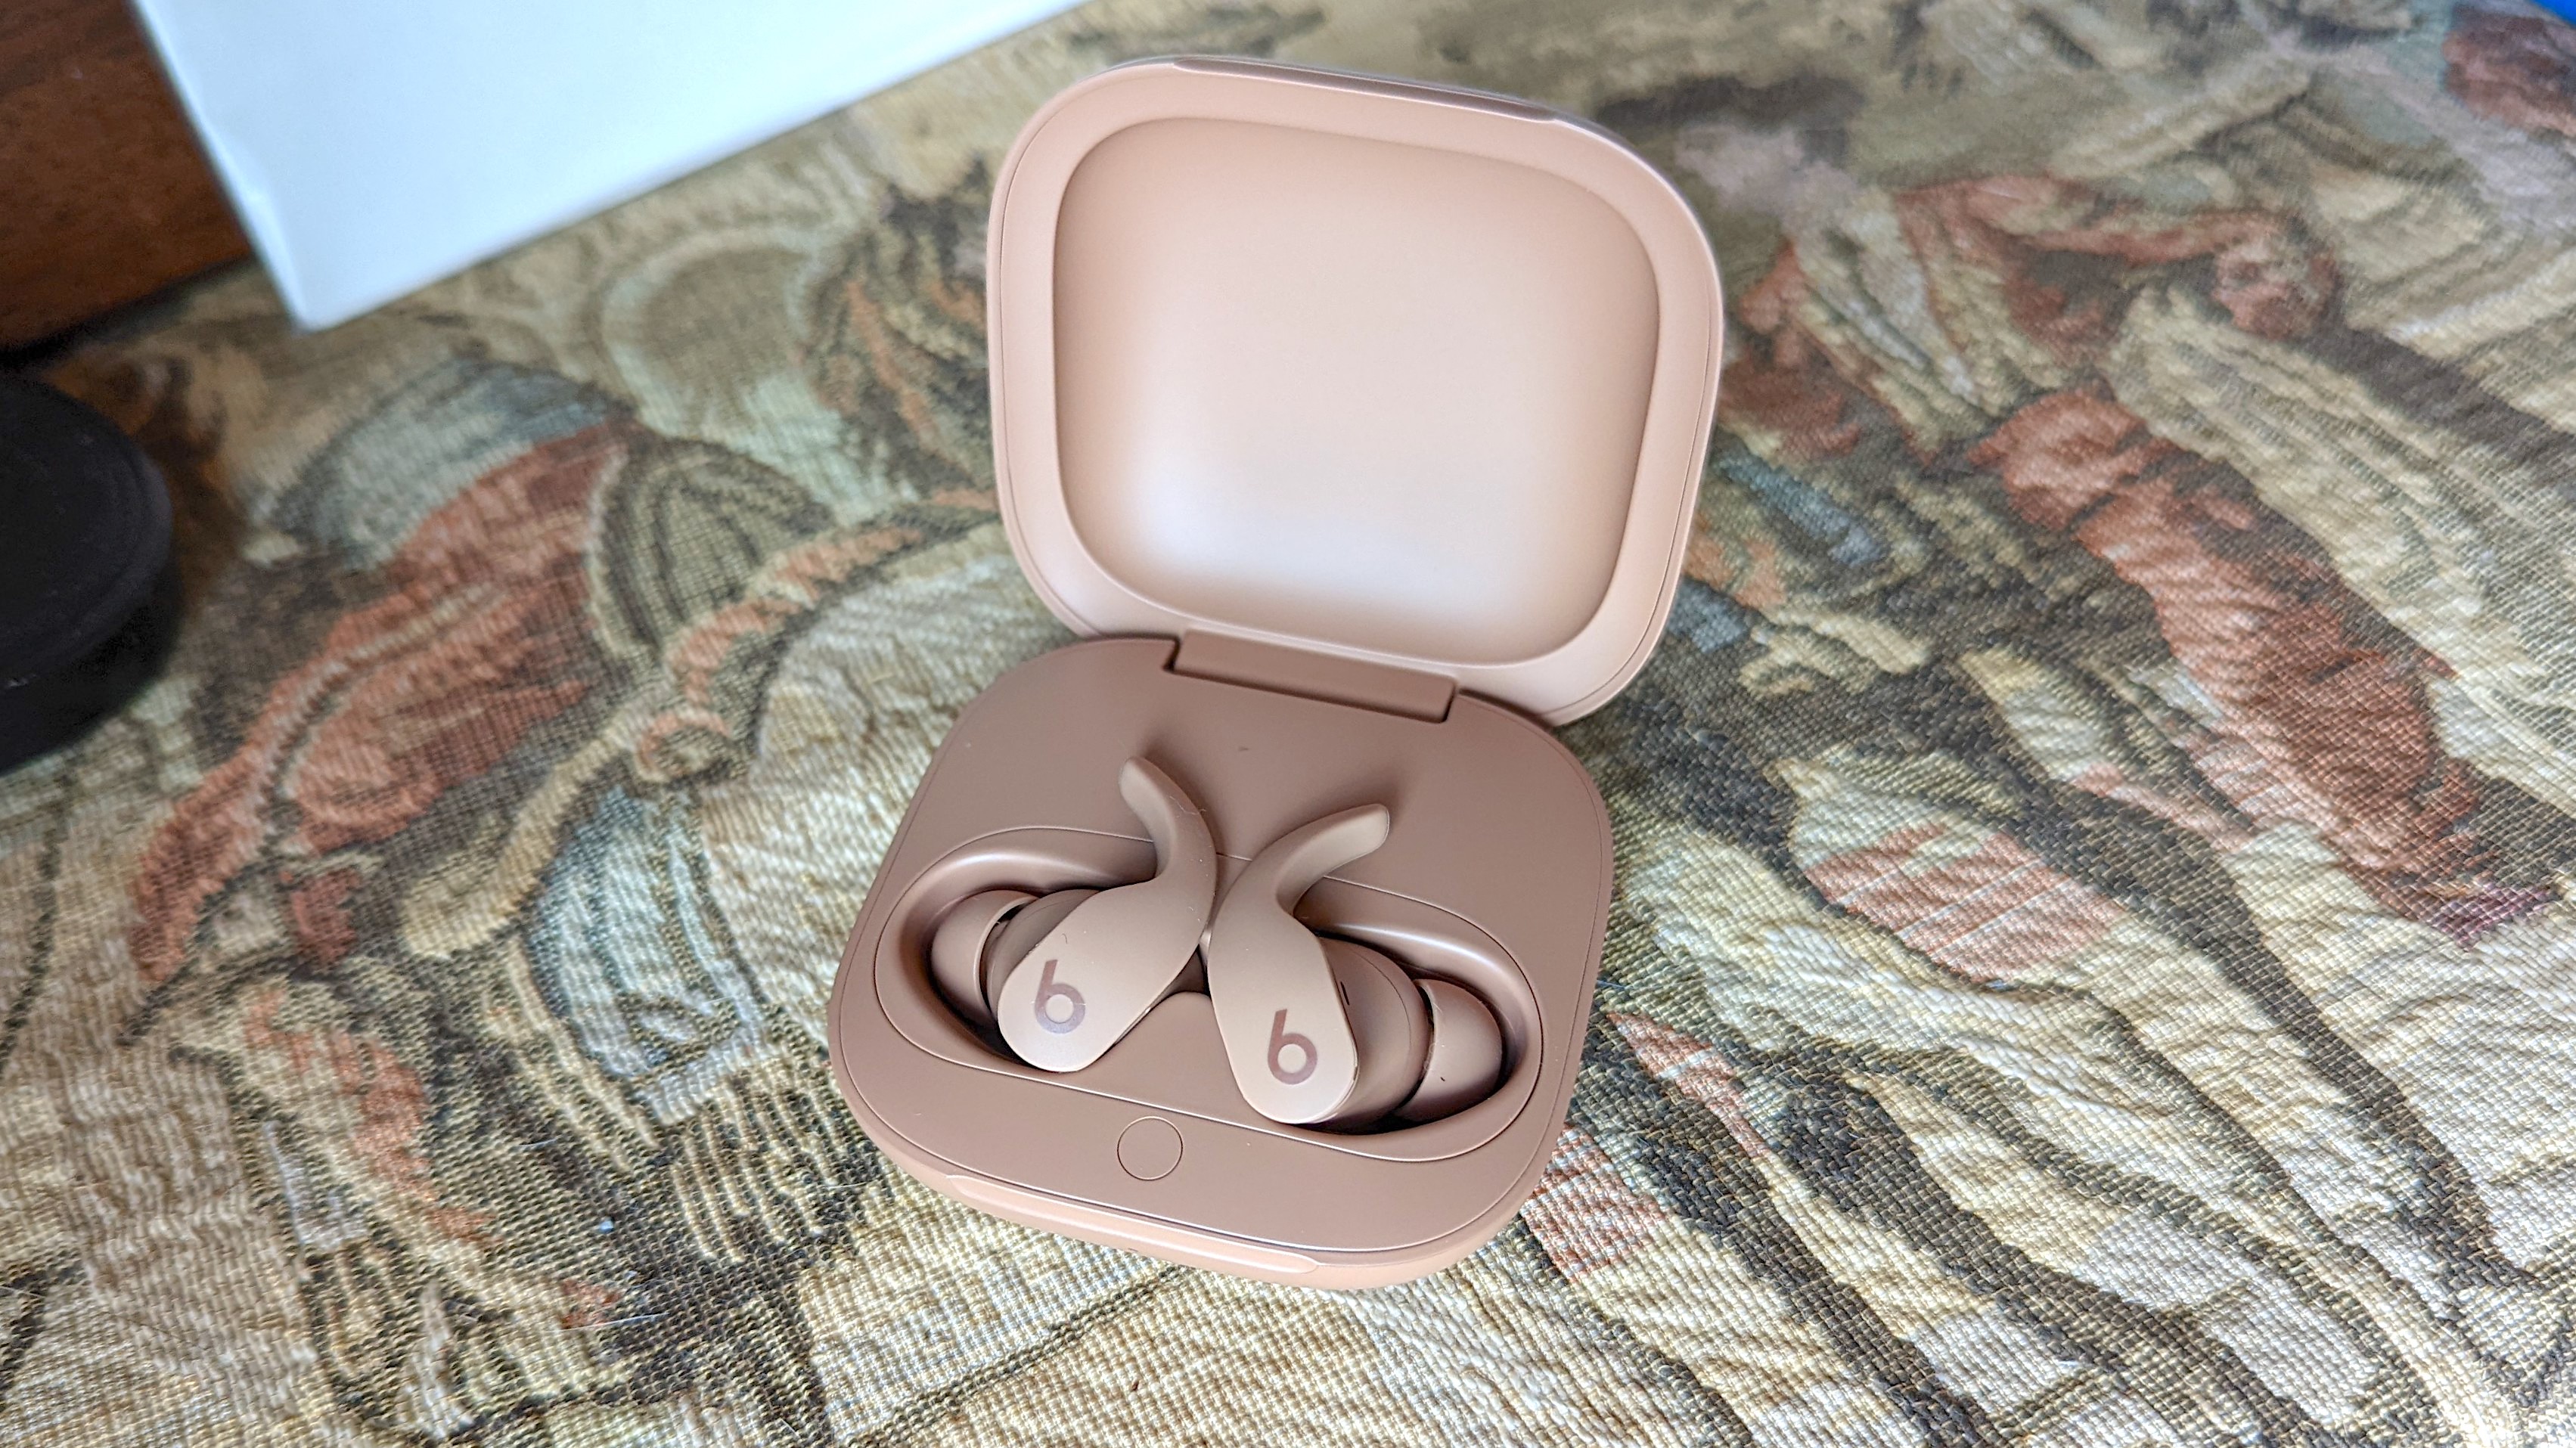 The dune colored Beats Fit Pro wireless earbuds from the Kim Kardashian Collection